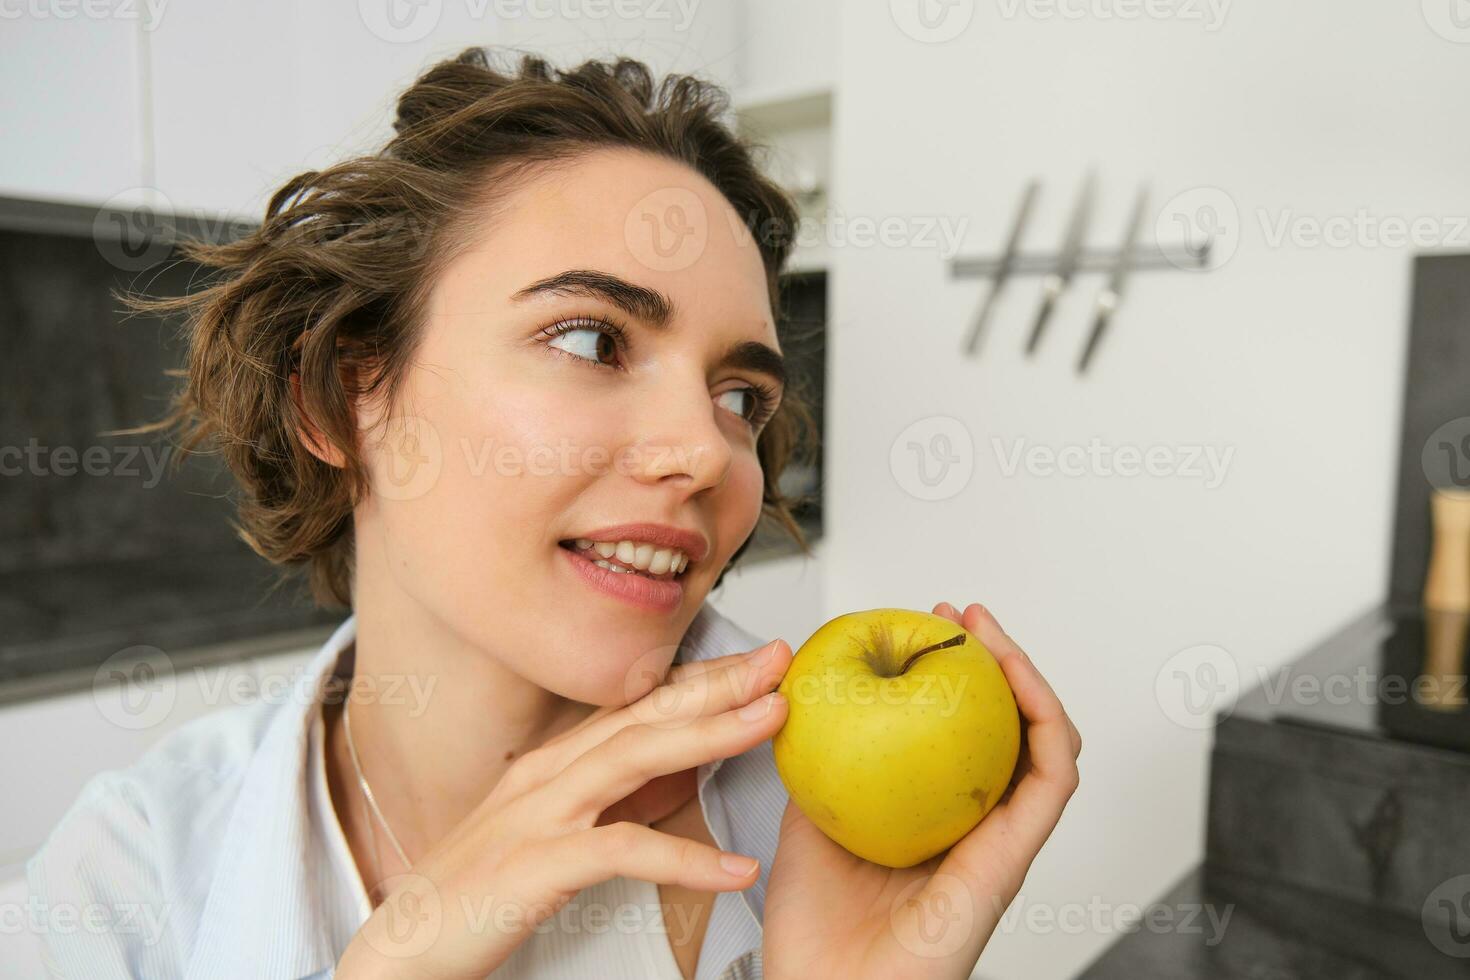 Close up portrait of healthy, beautiful young woman holding an apple, smiling photo